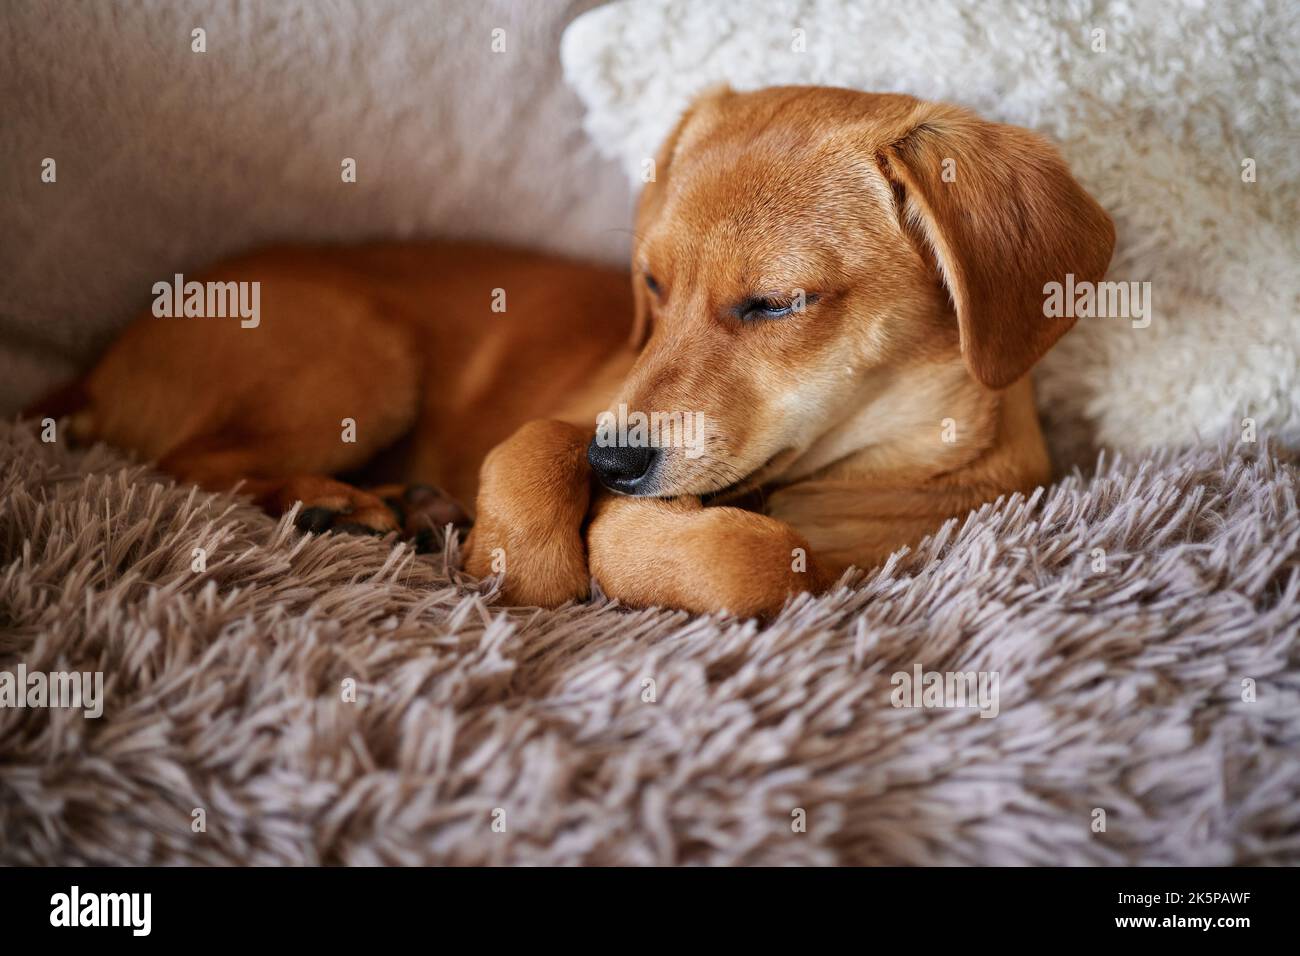 Cute ginger puppy with lonely emotion sleeping on a fluffy grey blanket. Brown cute doggy resting on a bed. High quality photo Stock Photo